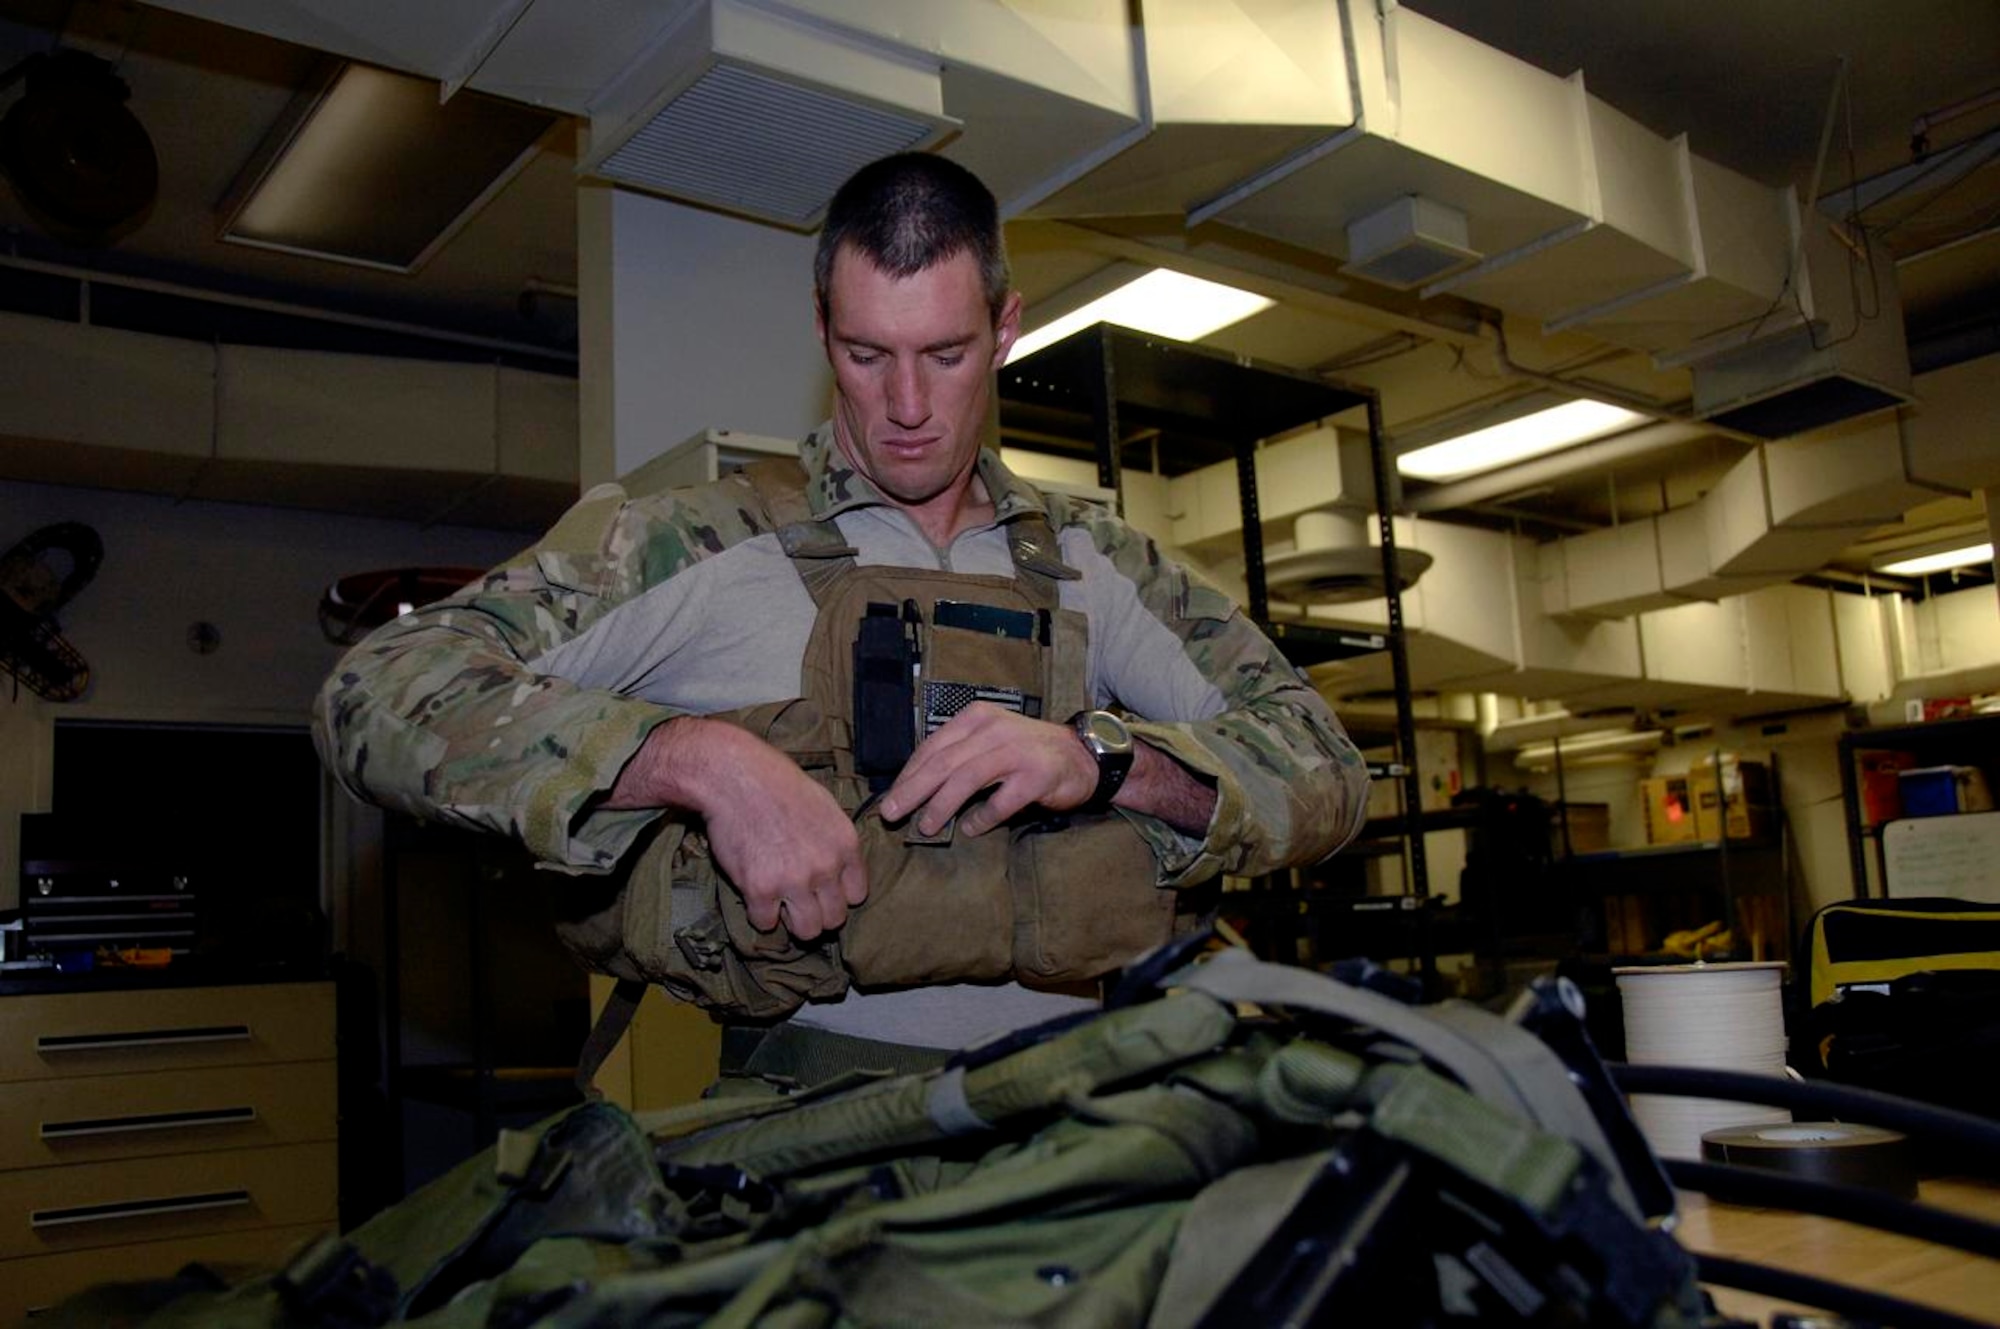 Technical Sgt. Sean Kirsch dons his tactical gear for a routine training mission March 10 at Moffett Federal Airfield, Calif. Sergeant Kirsch used his specialized life saving skills to assist an accident victim March 9 near Suisun, Calif. Sergeant Kirsch is a pararescueman from the 131st Rescue Squadron of the California Air National Guard. (U.S. Air Force photo/Tech. Sgt. Ray Aquino) 
